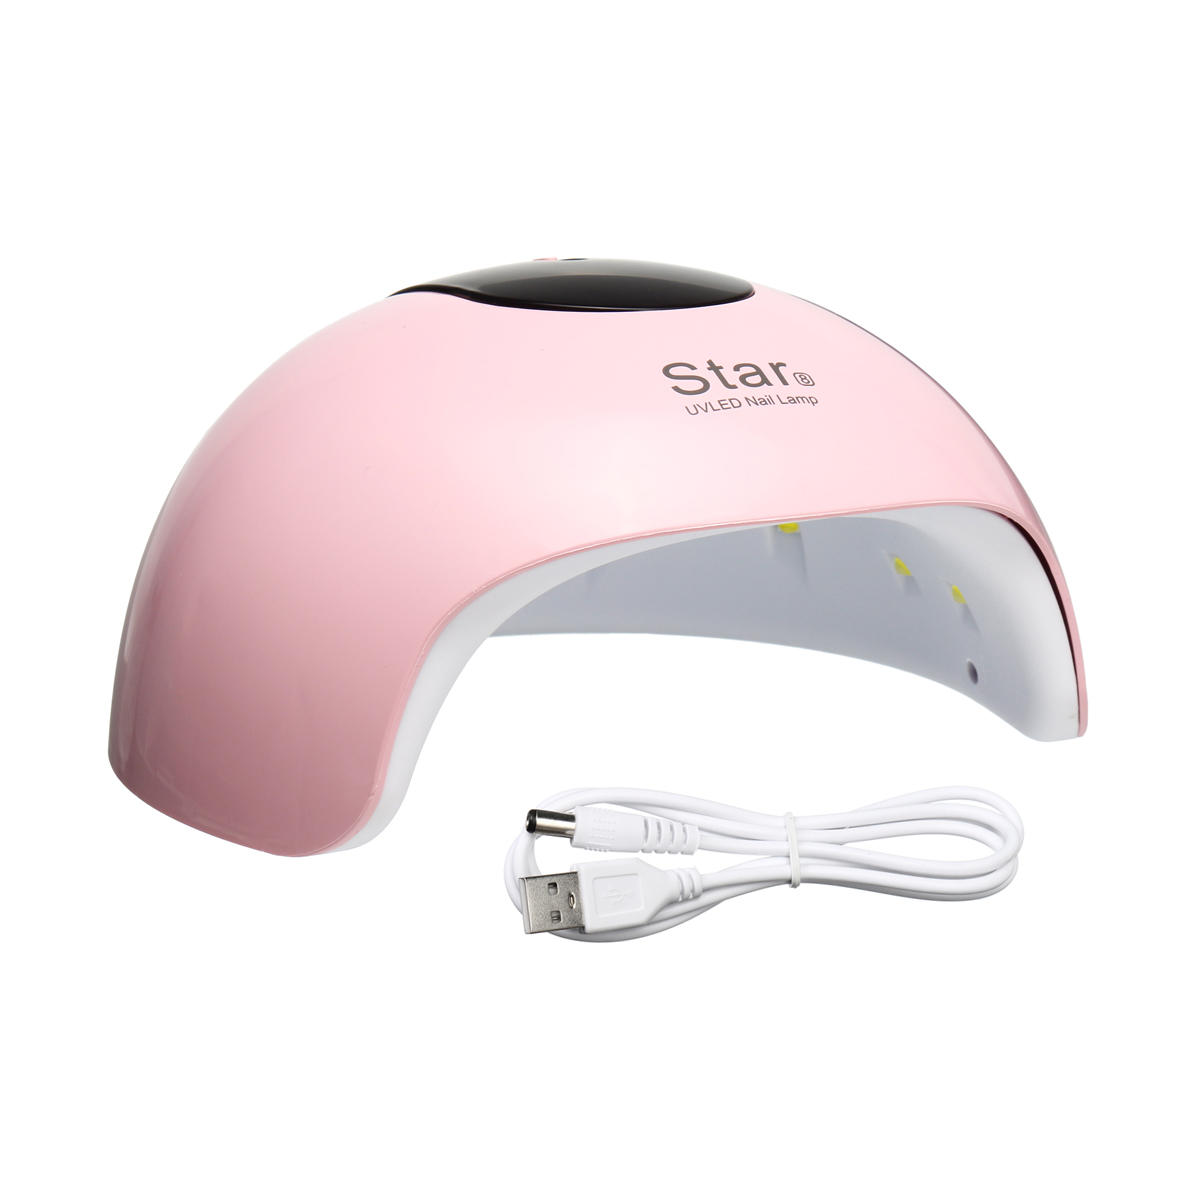 Star 6 UV Lamp For Manicure LED Nail Dryer Lamp Sun Light Curing All Gel  Polish Sale - Banggood USA sold out-arrival notice-arrival notice